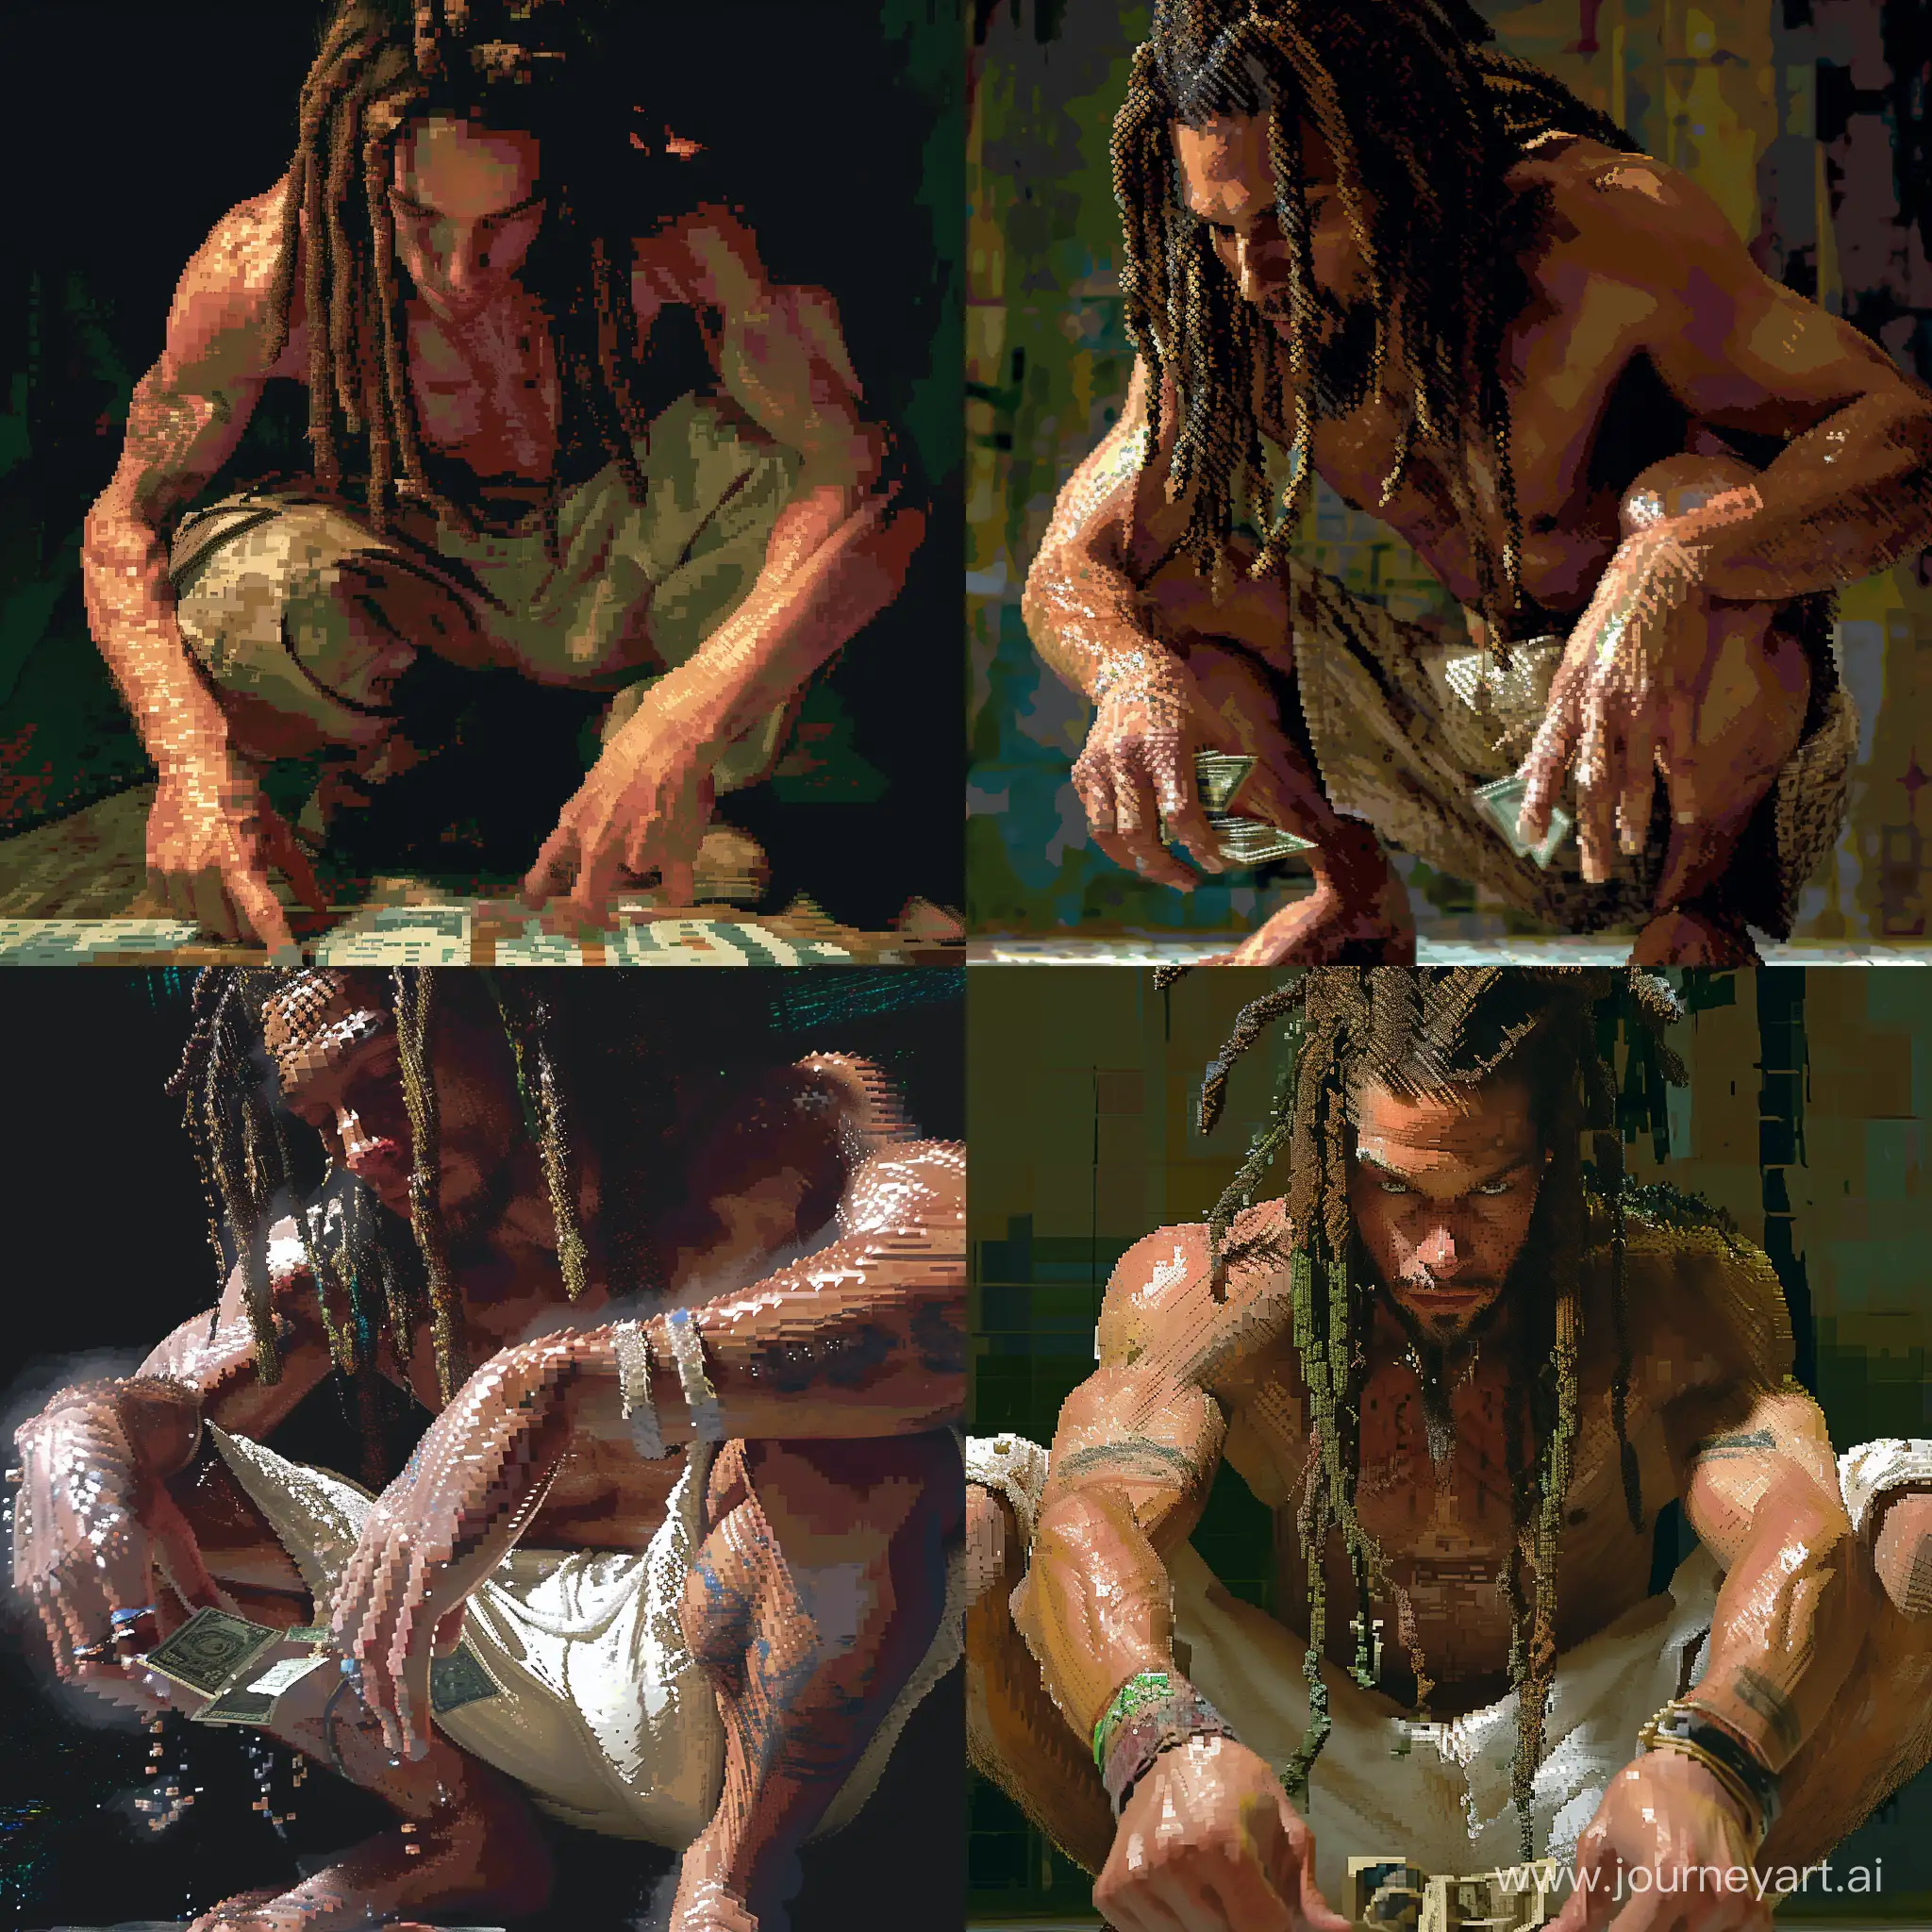 
pixelated glitchart of close-up of White man with dreadlocks squatting and doing a money spread , ps1 playstation psx gamecube game radioactive dreams screencapture, bryce 3d